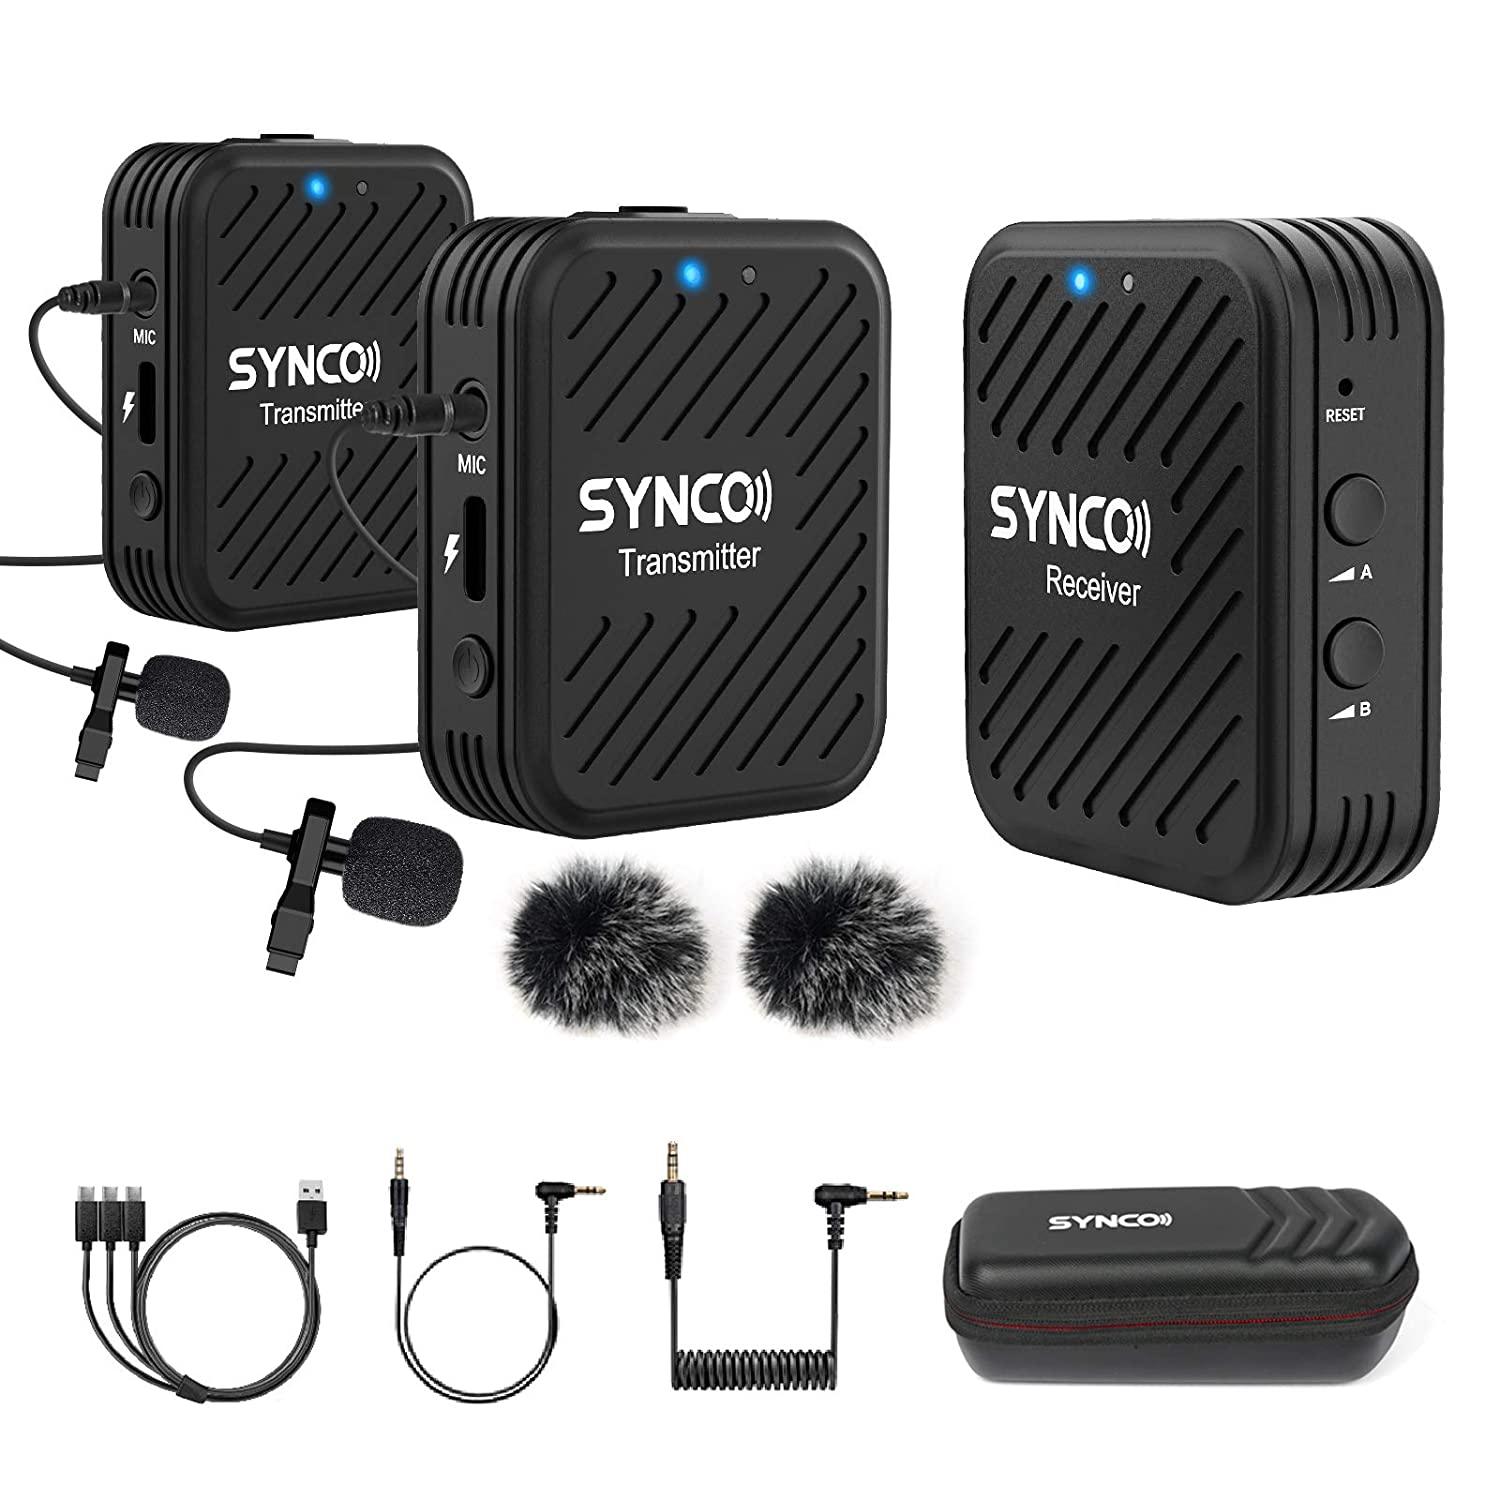 Synco WAir-G1-A2 Ultracompact 2-Person Digital Wireless Microphone System for Mirrorless/DSLR Cameras (2.4 GHz)